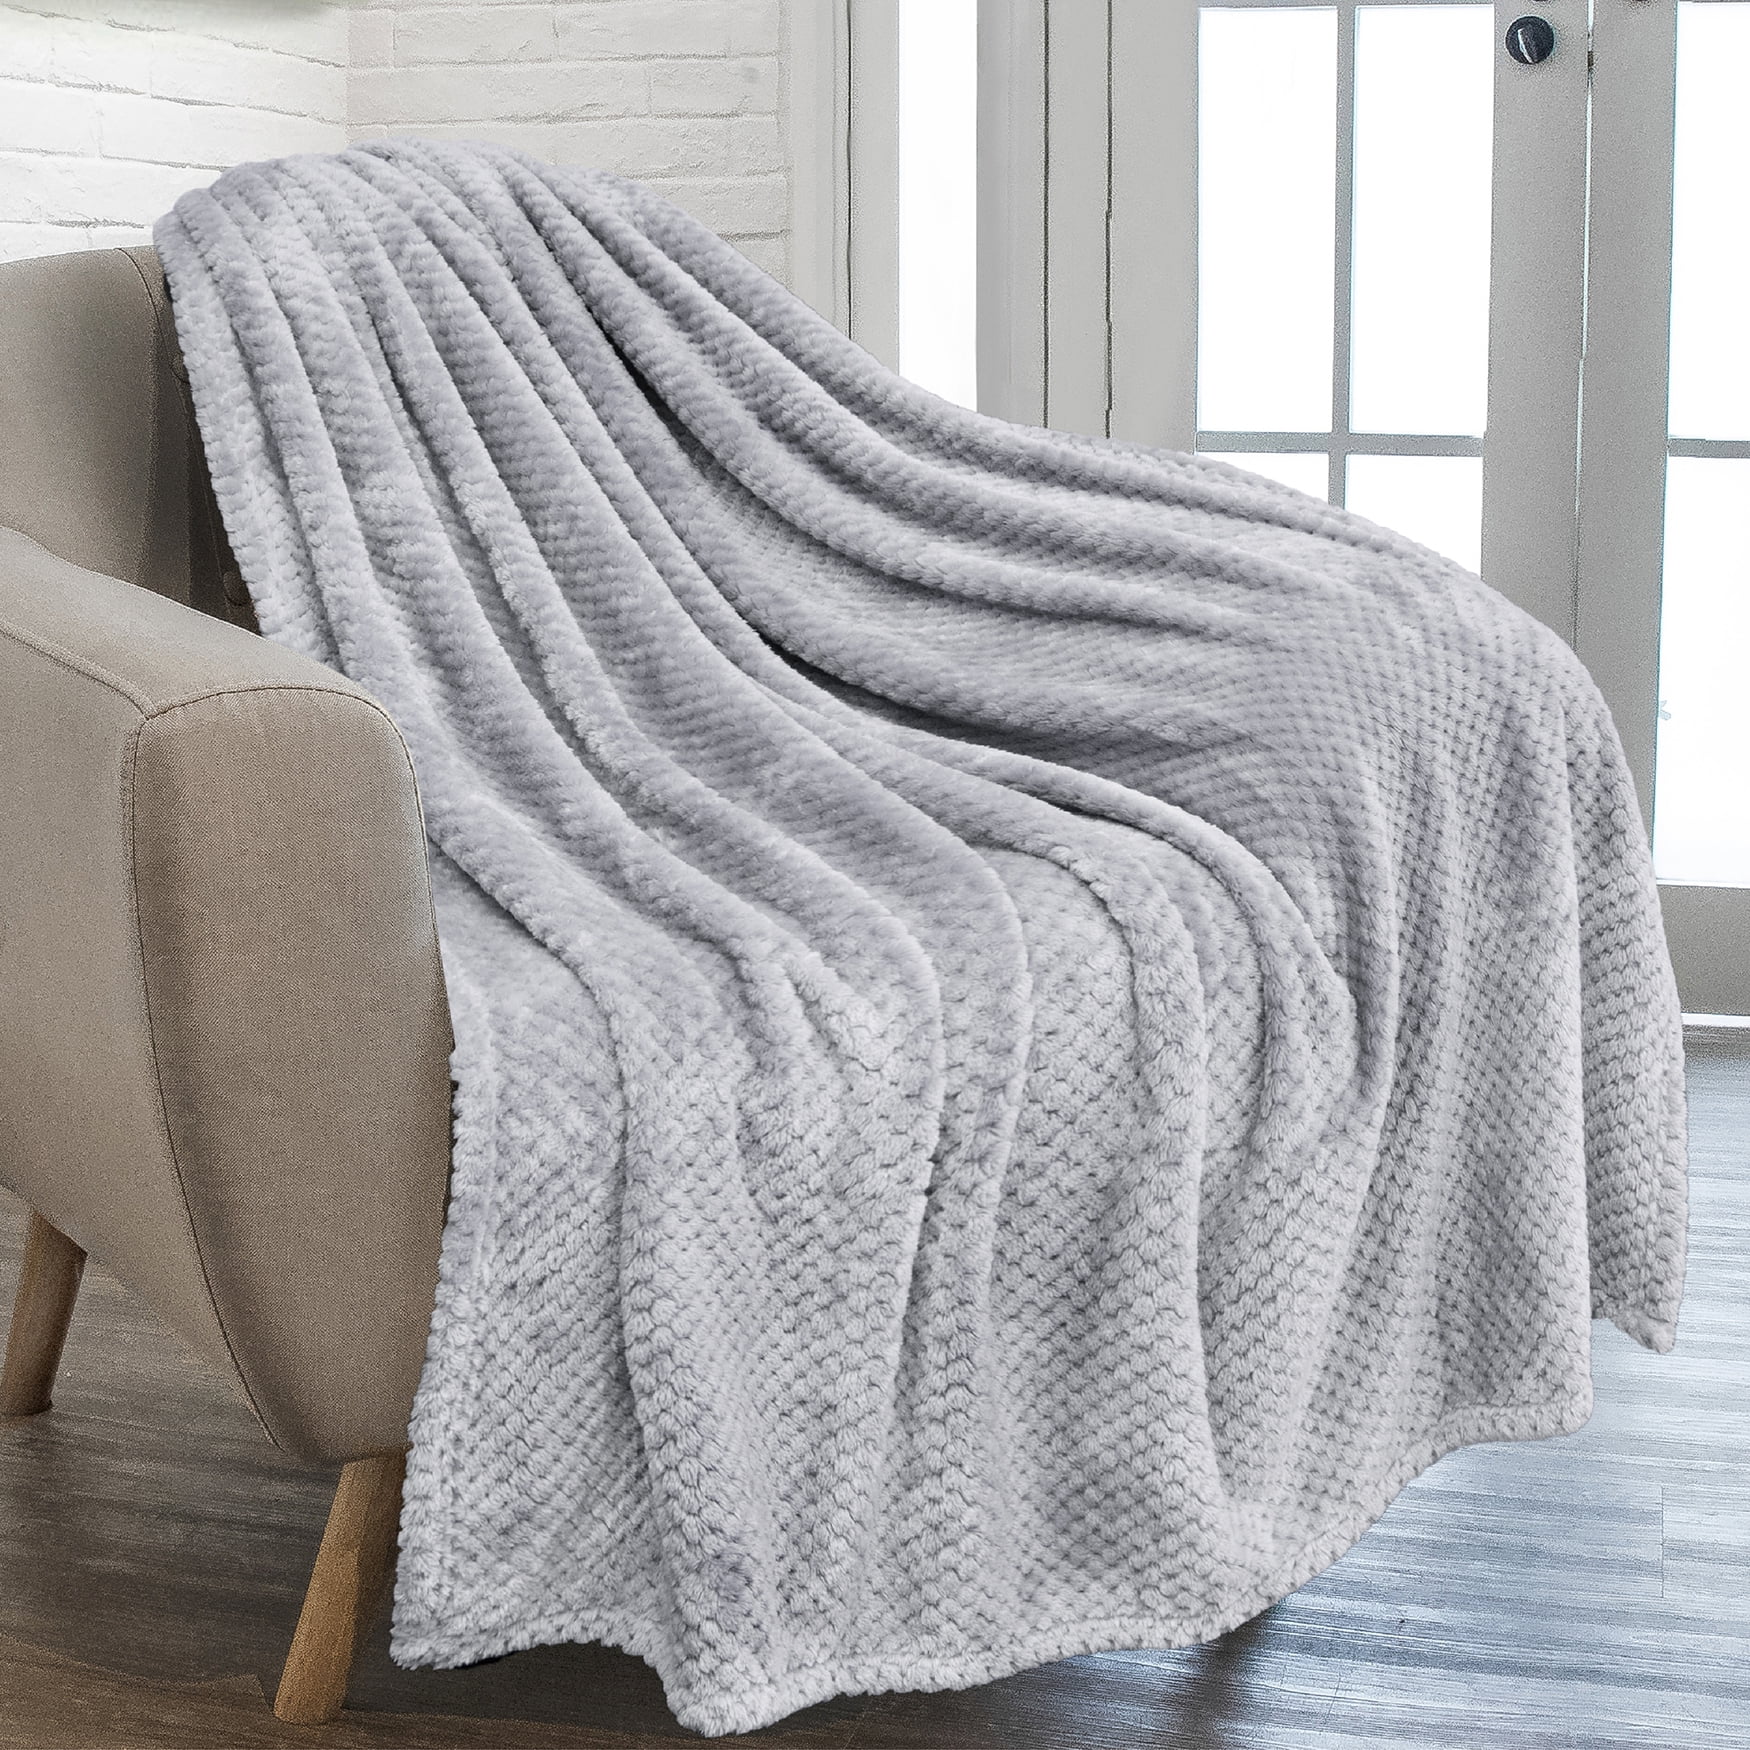 Throw Blanket Lightweight Cozy Fuzzy Blanket for Couch Sofa Bed Super Soft Warm Plush Blankets and Throws Throw 50 x 60 Blue Green Stripes 